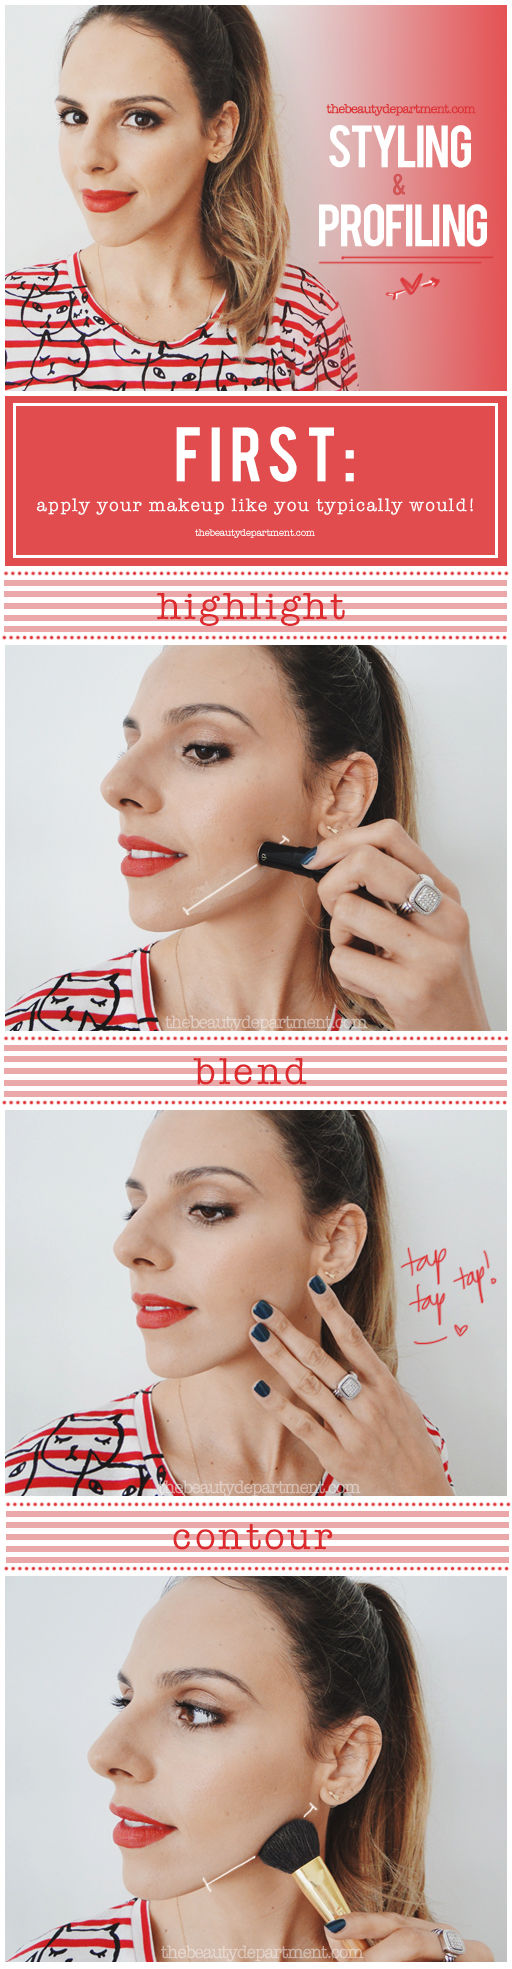 10 Contouring Hacks You Wish You Knew In 2016